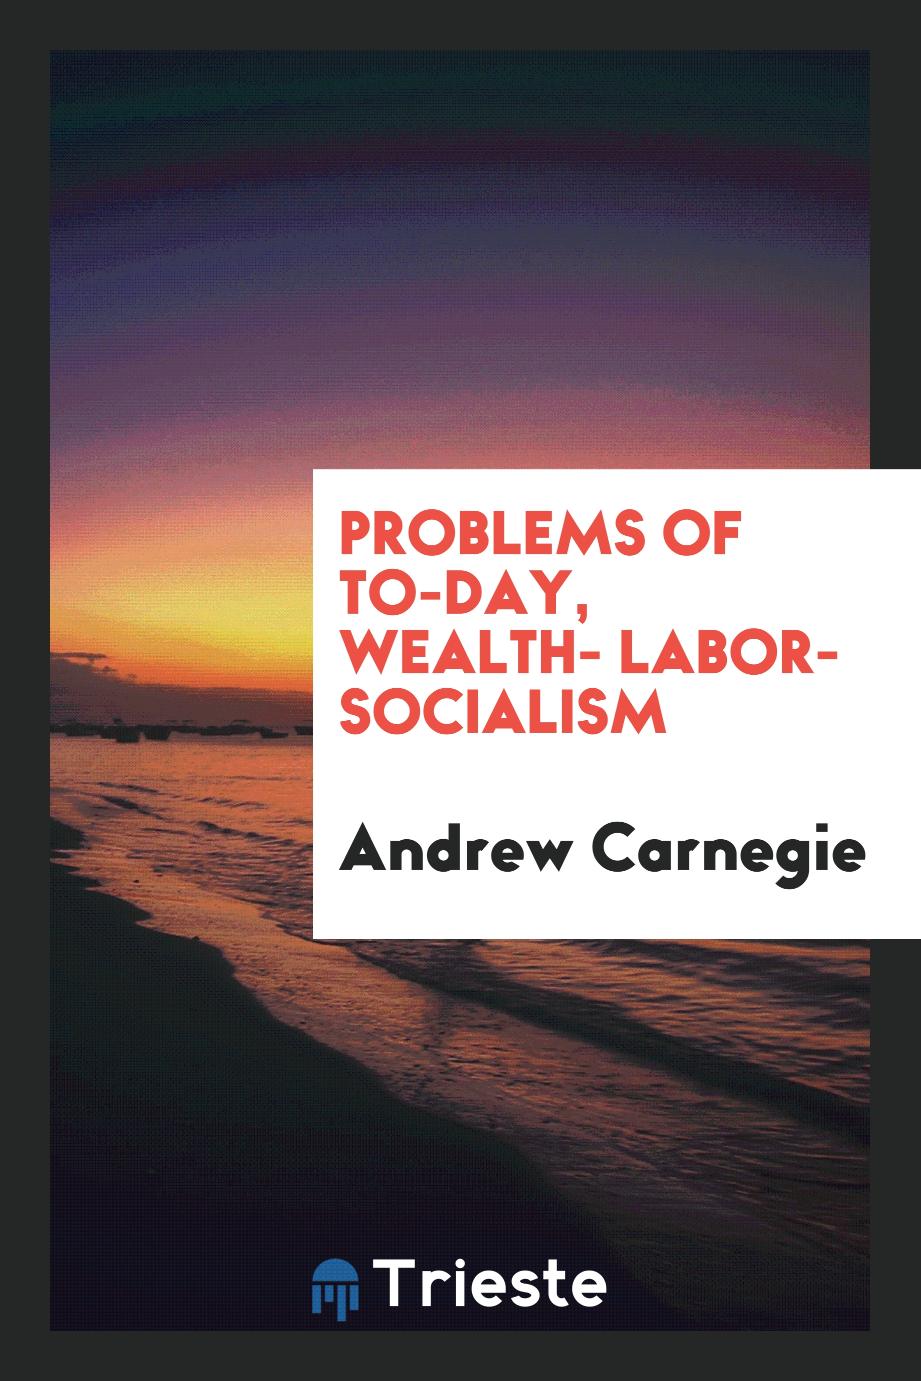 Problems of to-day, wealth- labor- socialism